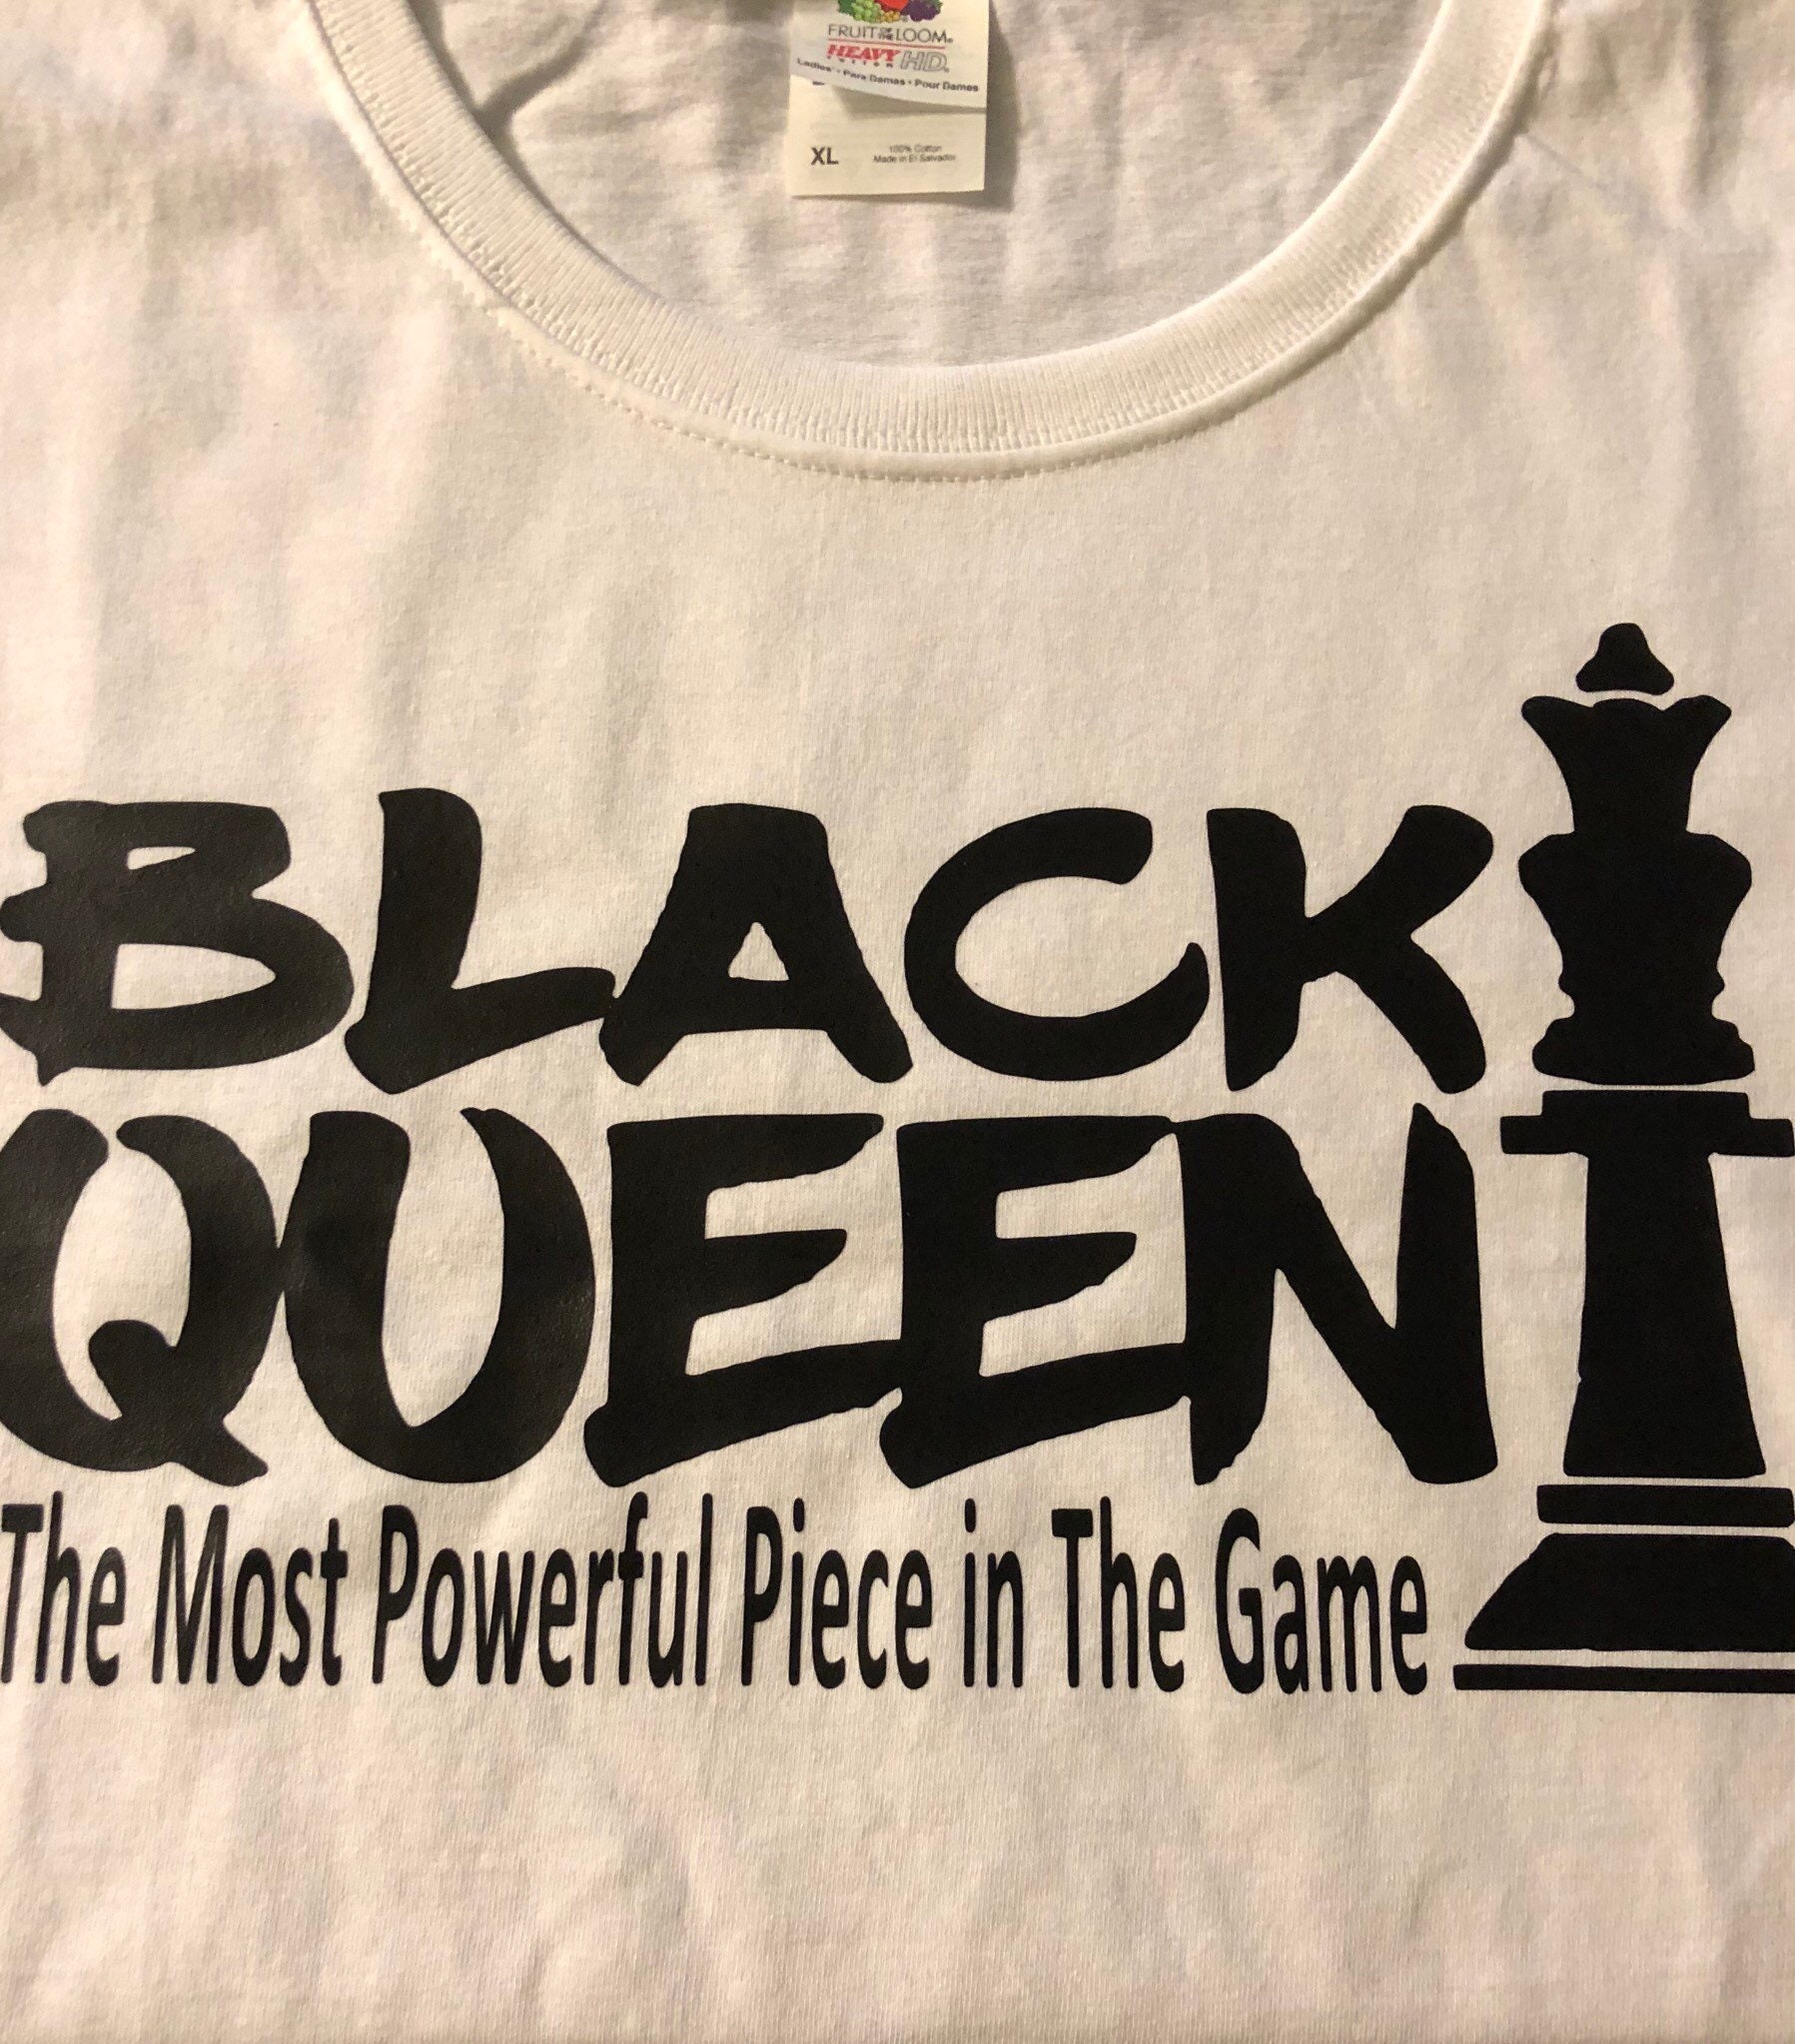 Black Queen The Most Powerful Piece For Chess T-Shirt